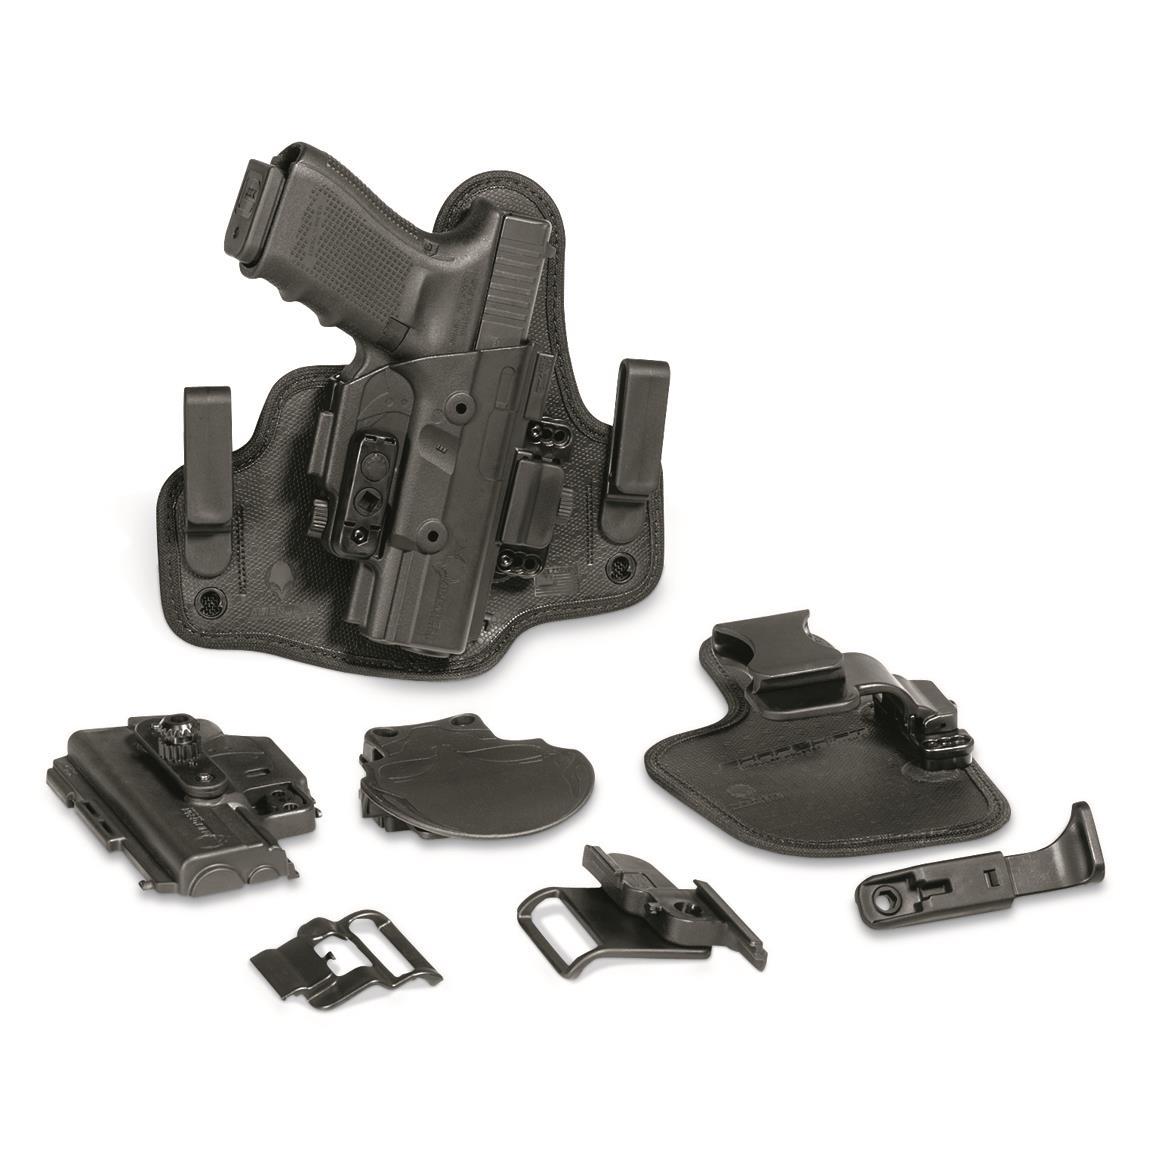 Alien Gear ShapeShift Holster Core Carry Pack, Smith & Wesson M&P Shield 9mm